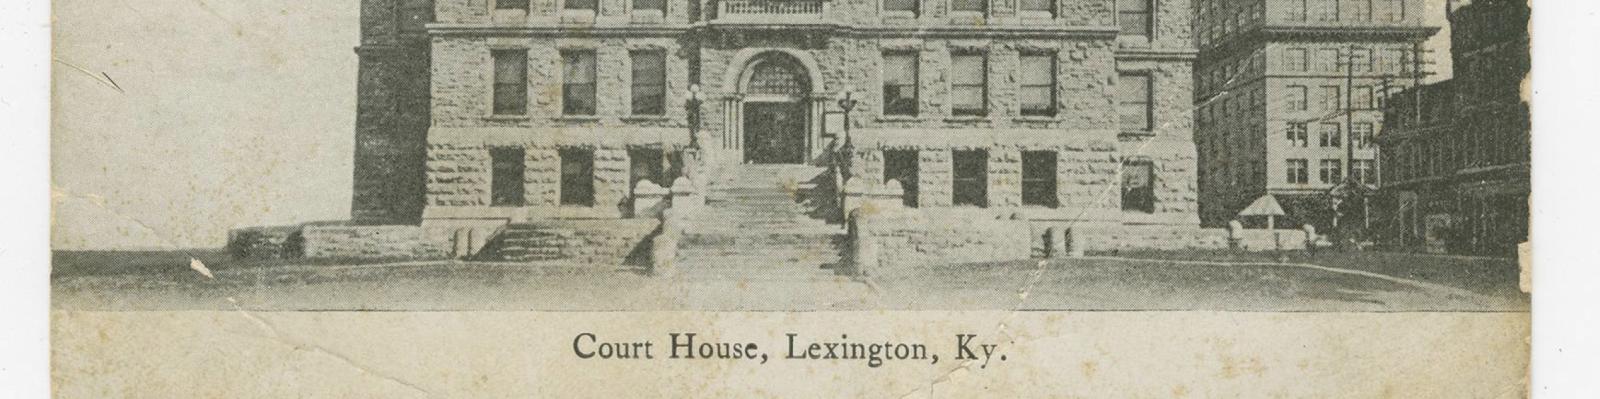 Postcard photograph of historic Fayette County Courthouse